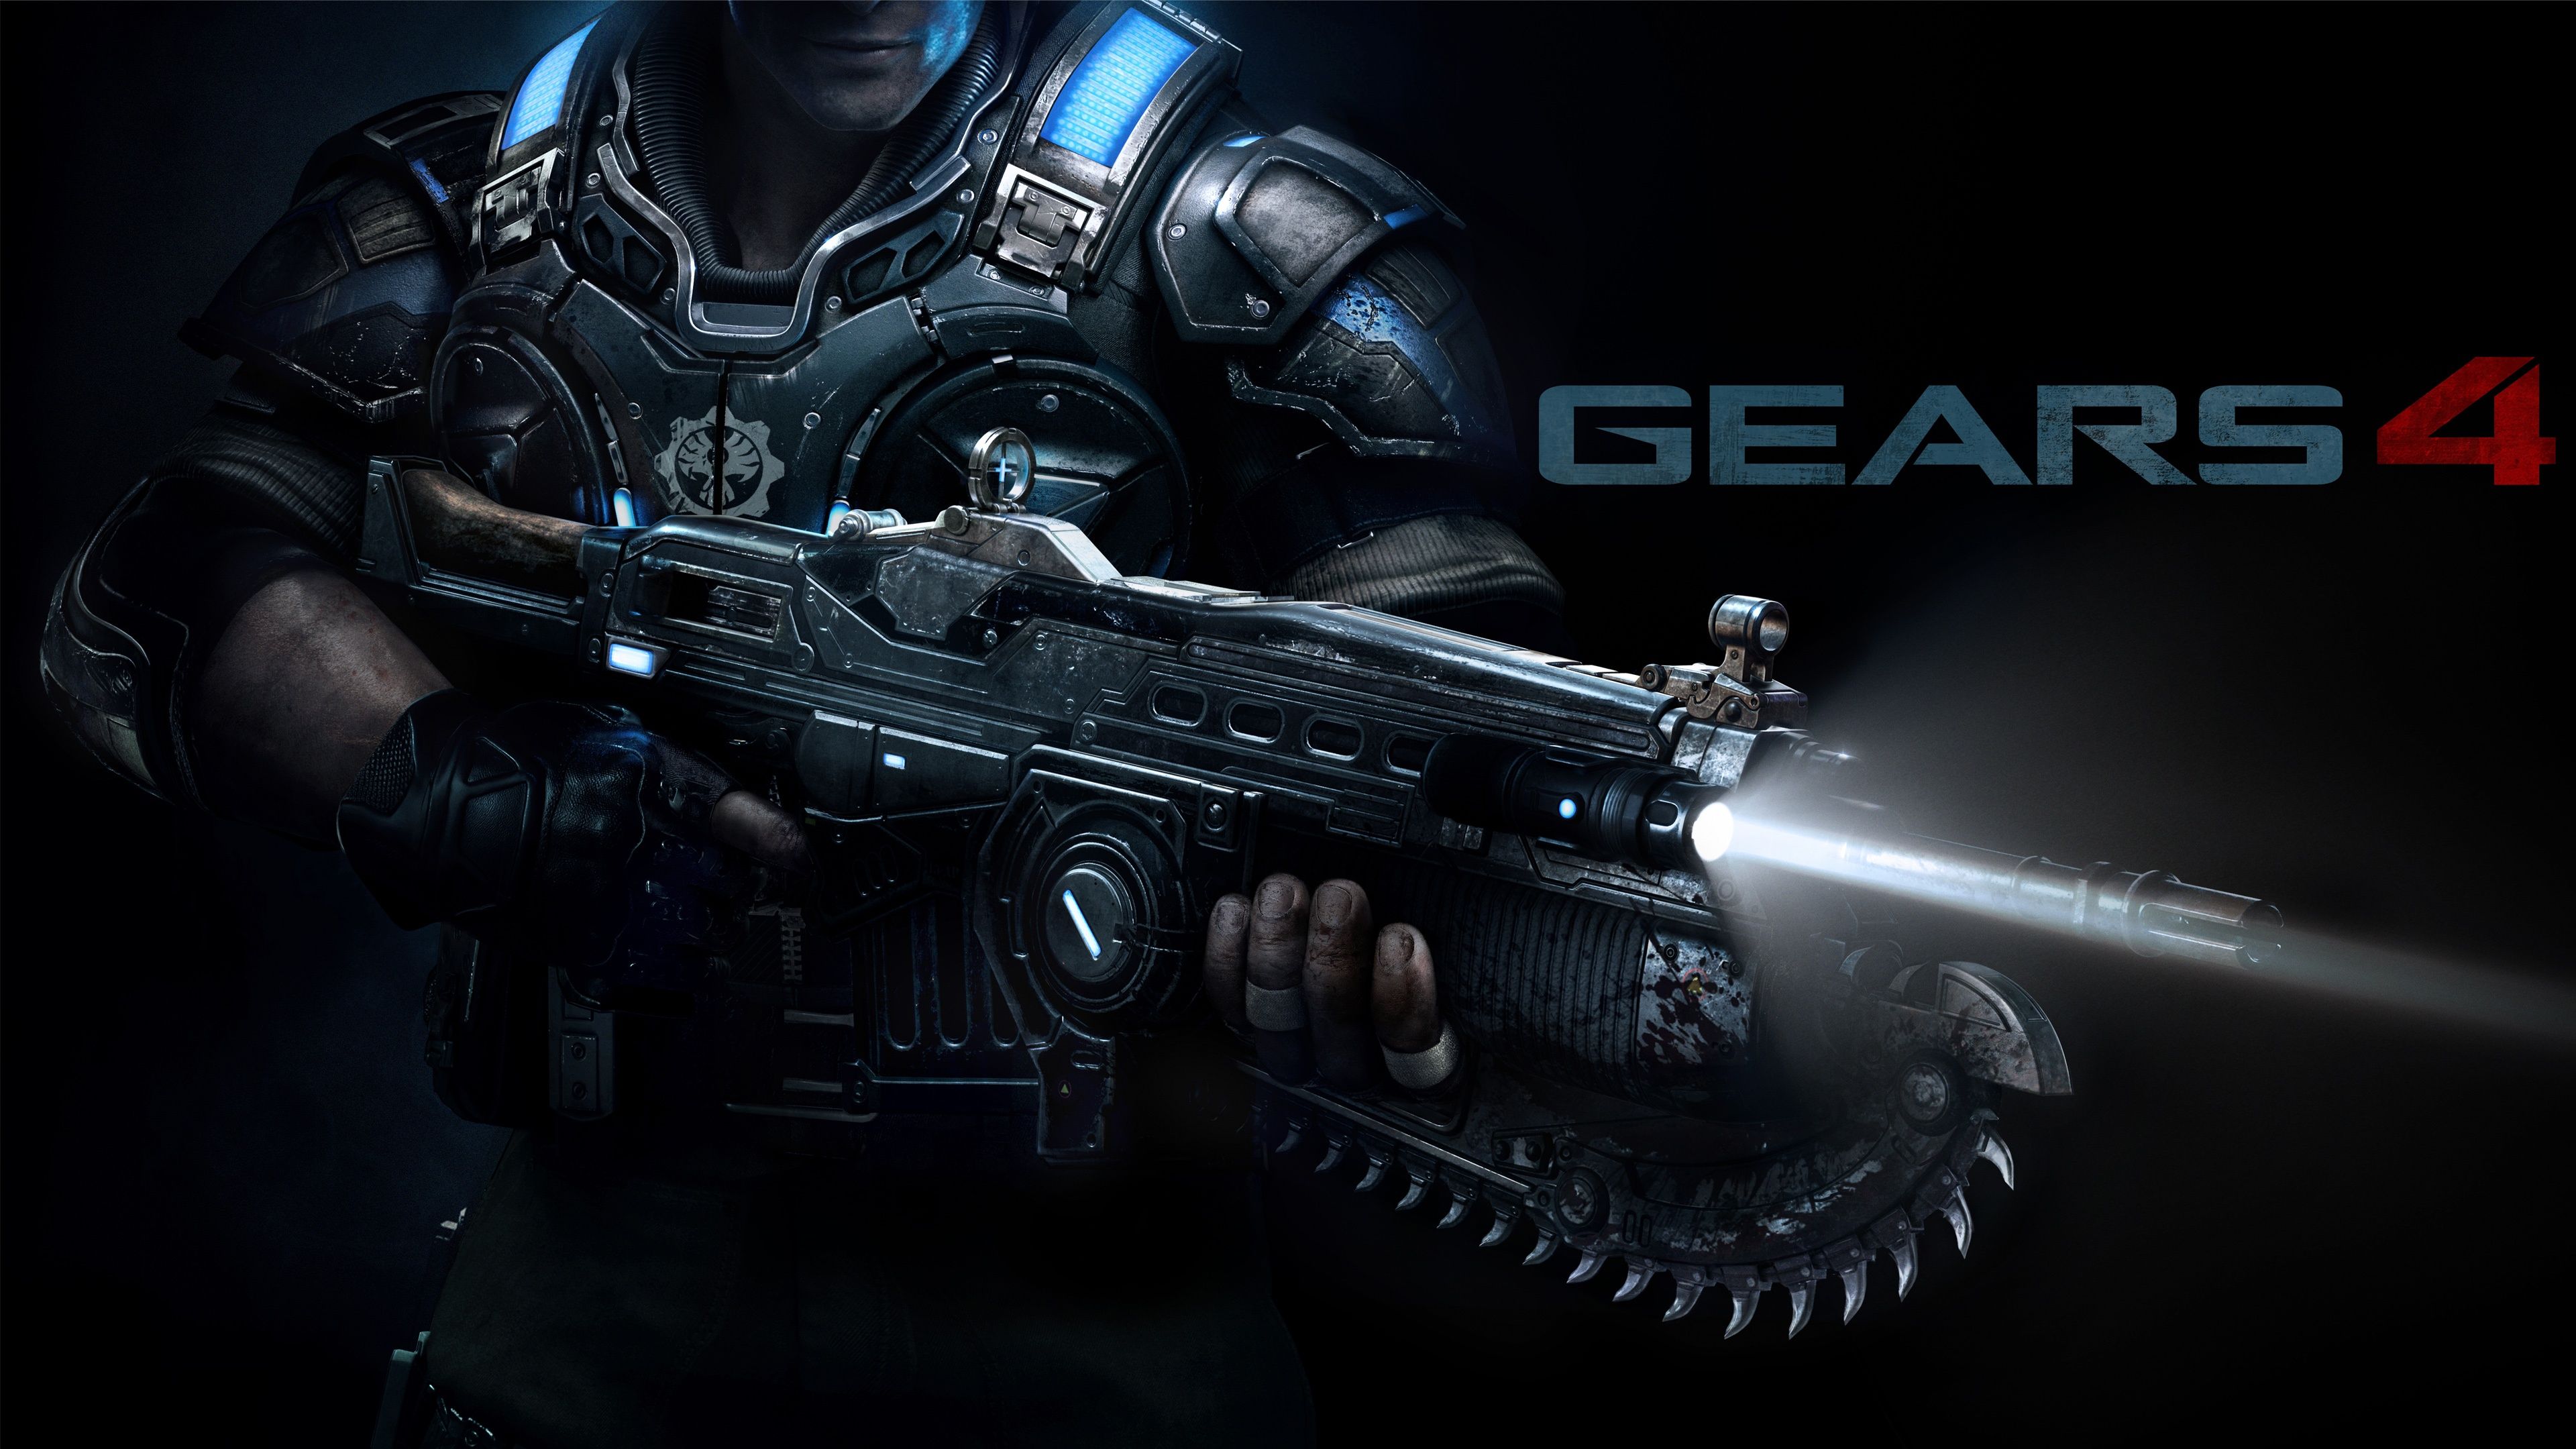 Wallpapers Tagged With GEARS GEARS HD Wallpapers